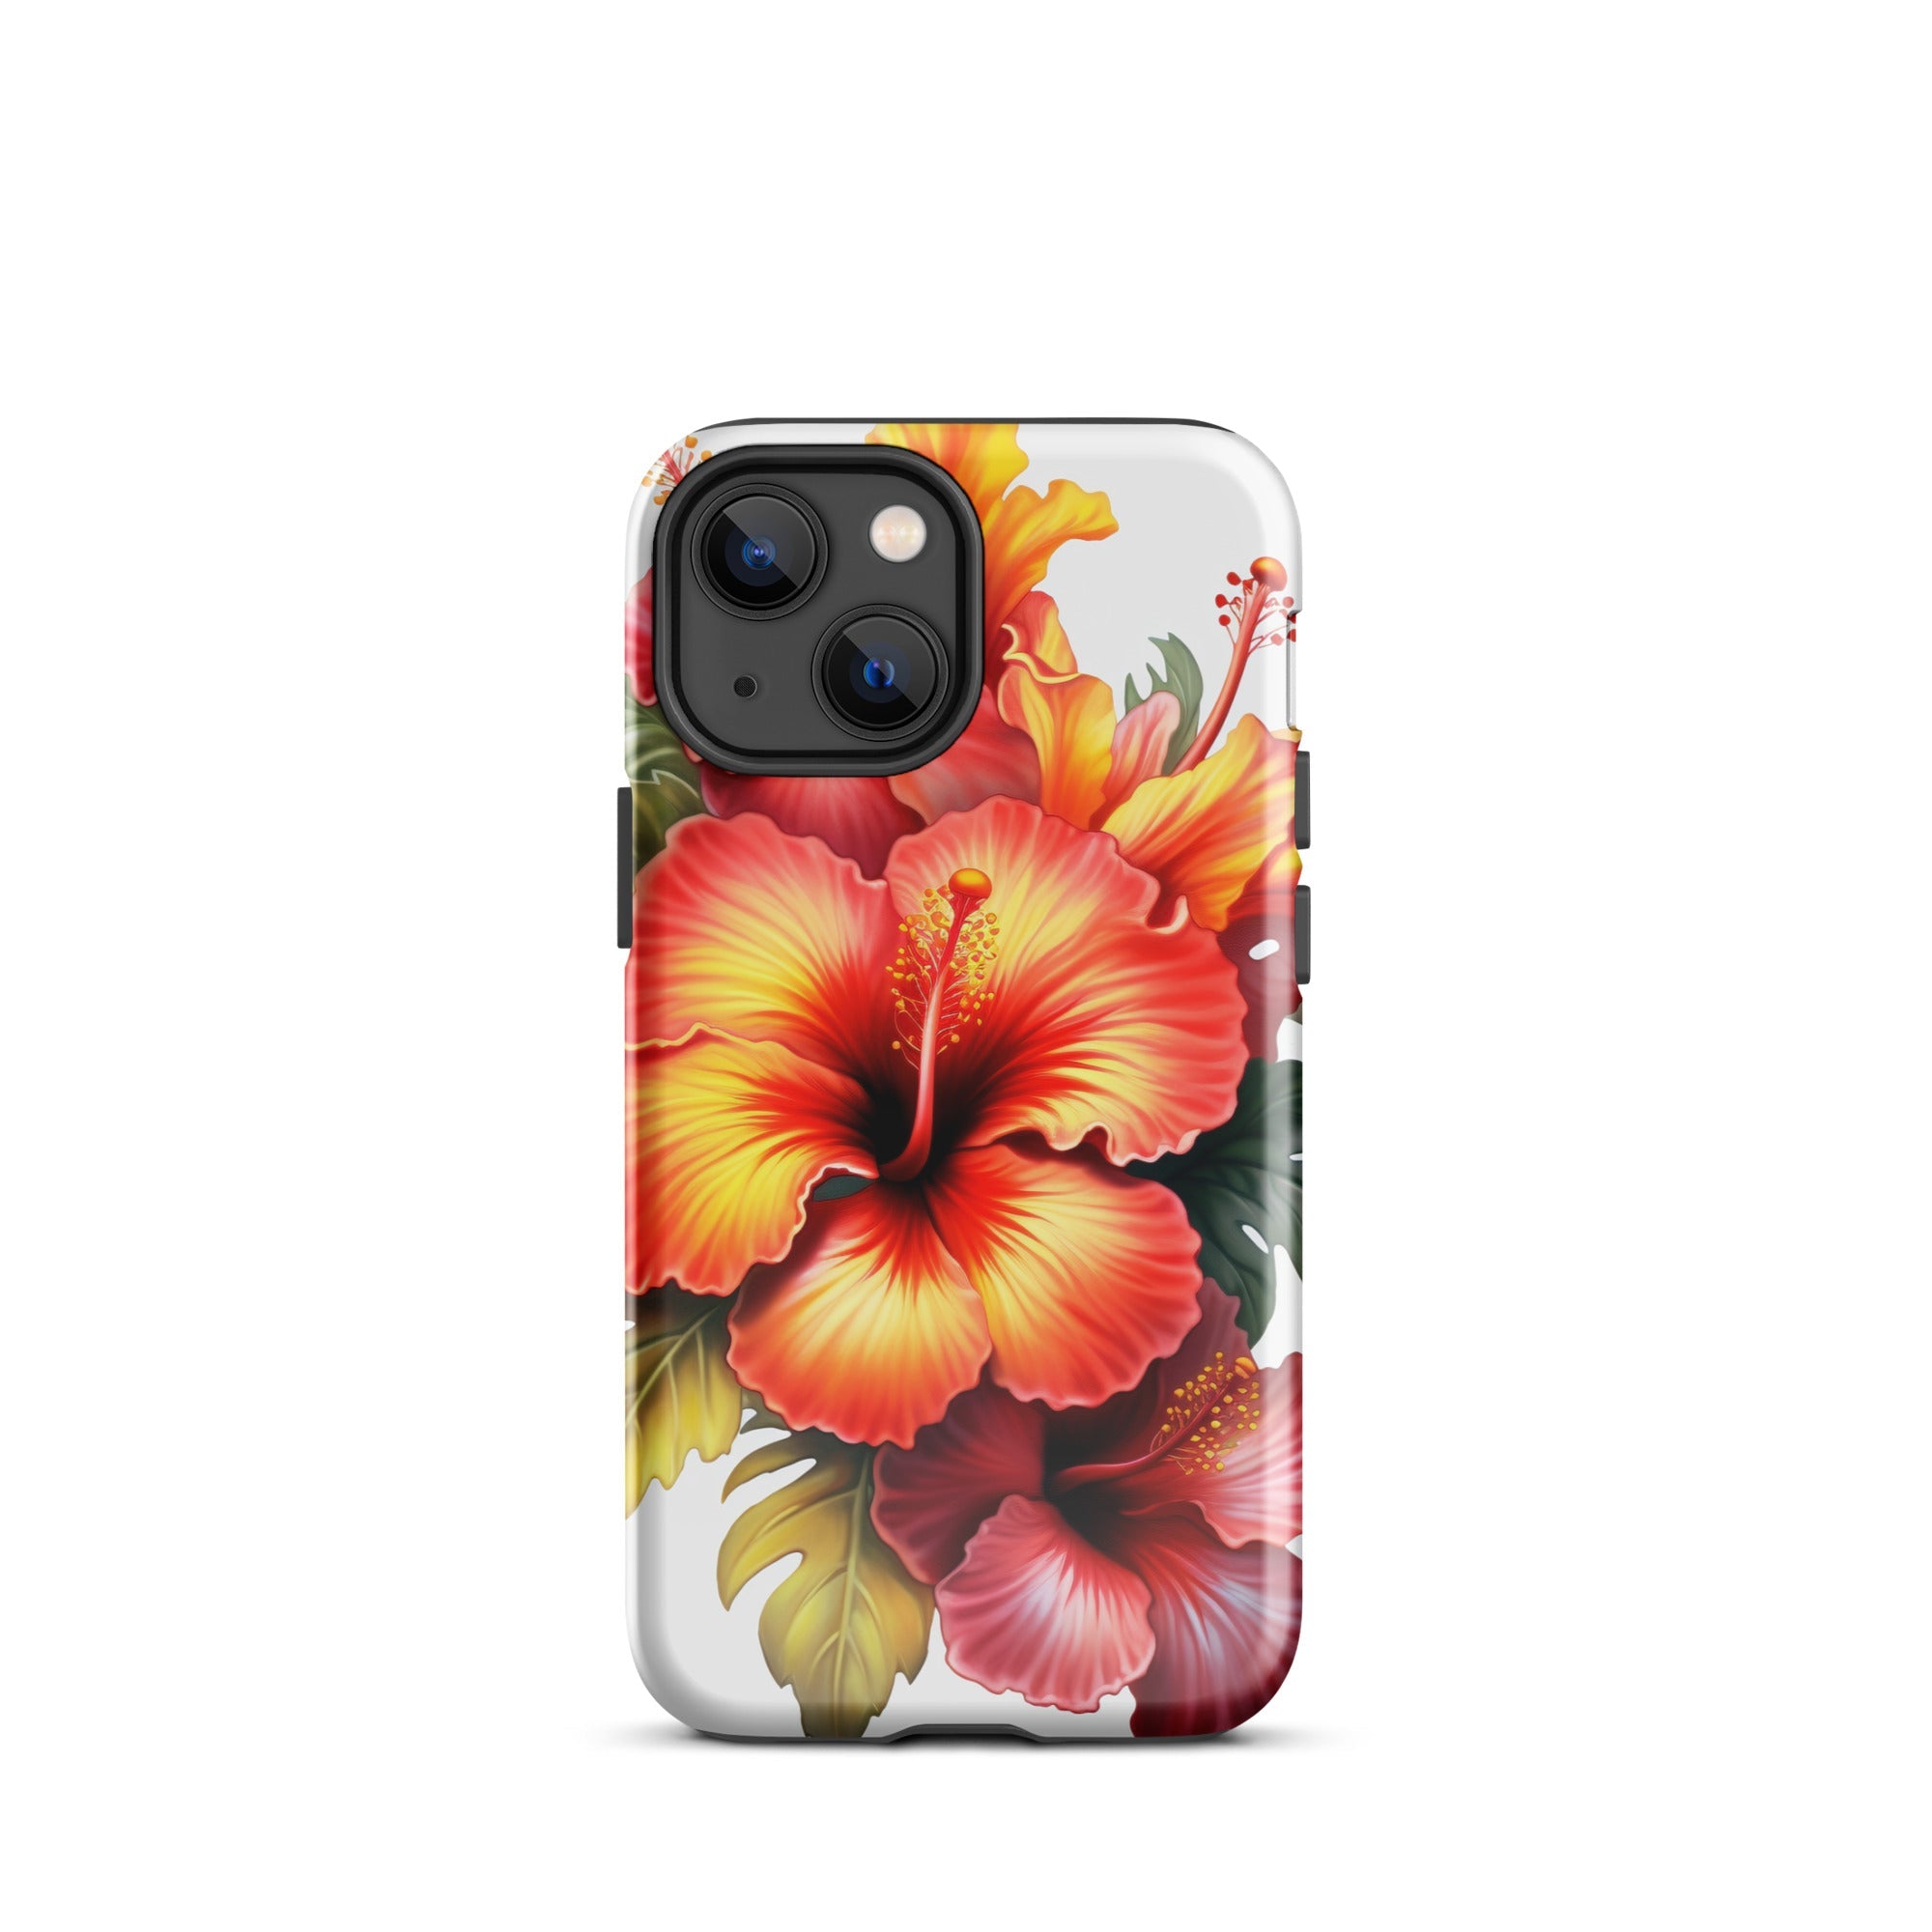 Hibiscus Flower iPhone Case by Visual Verse - Image 15